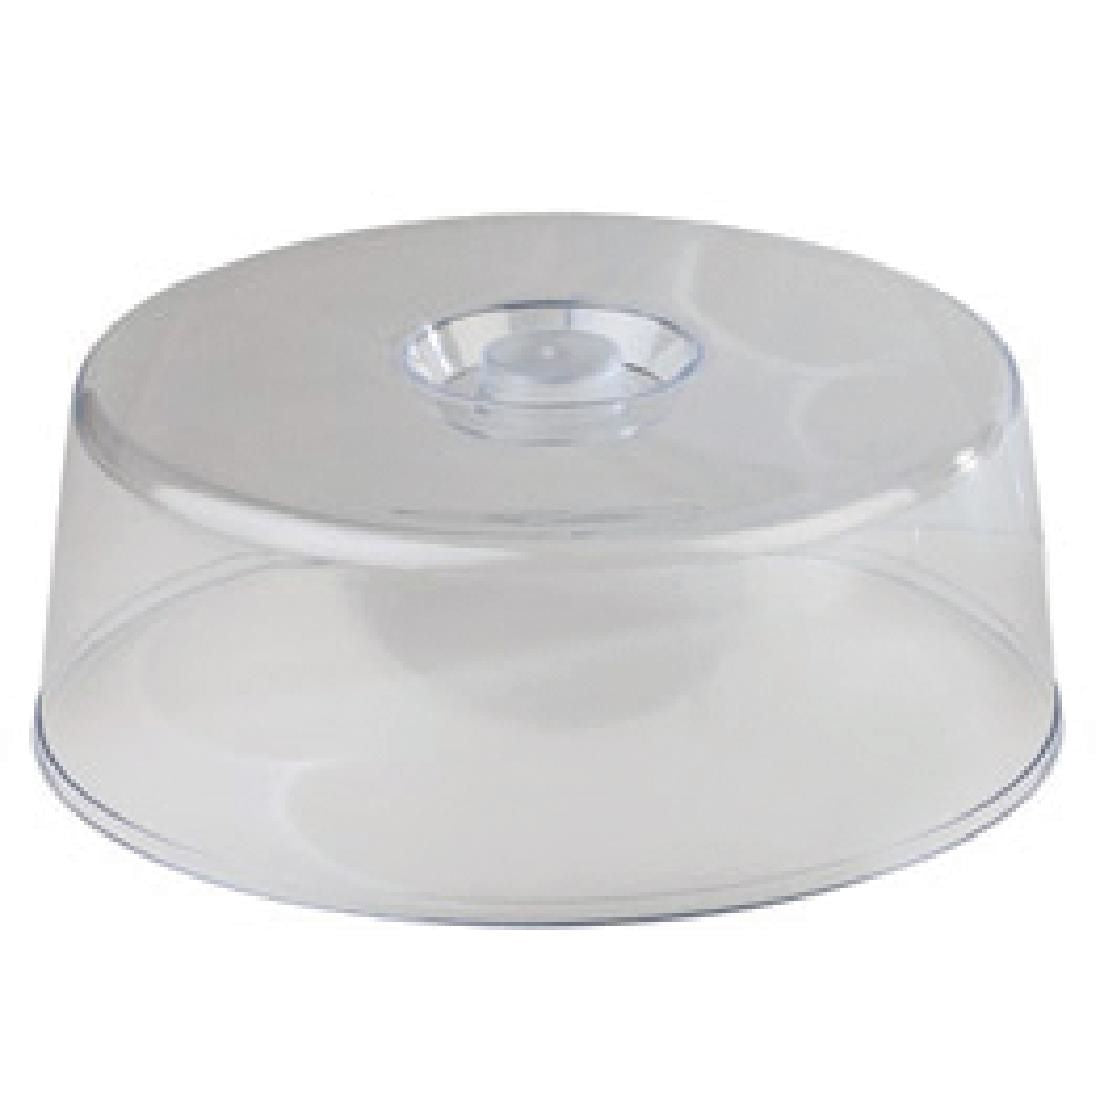 APS Lid for Rotating Lazy Susan Cake Stand JD Catering Equipment Solutions Ltd